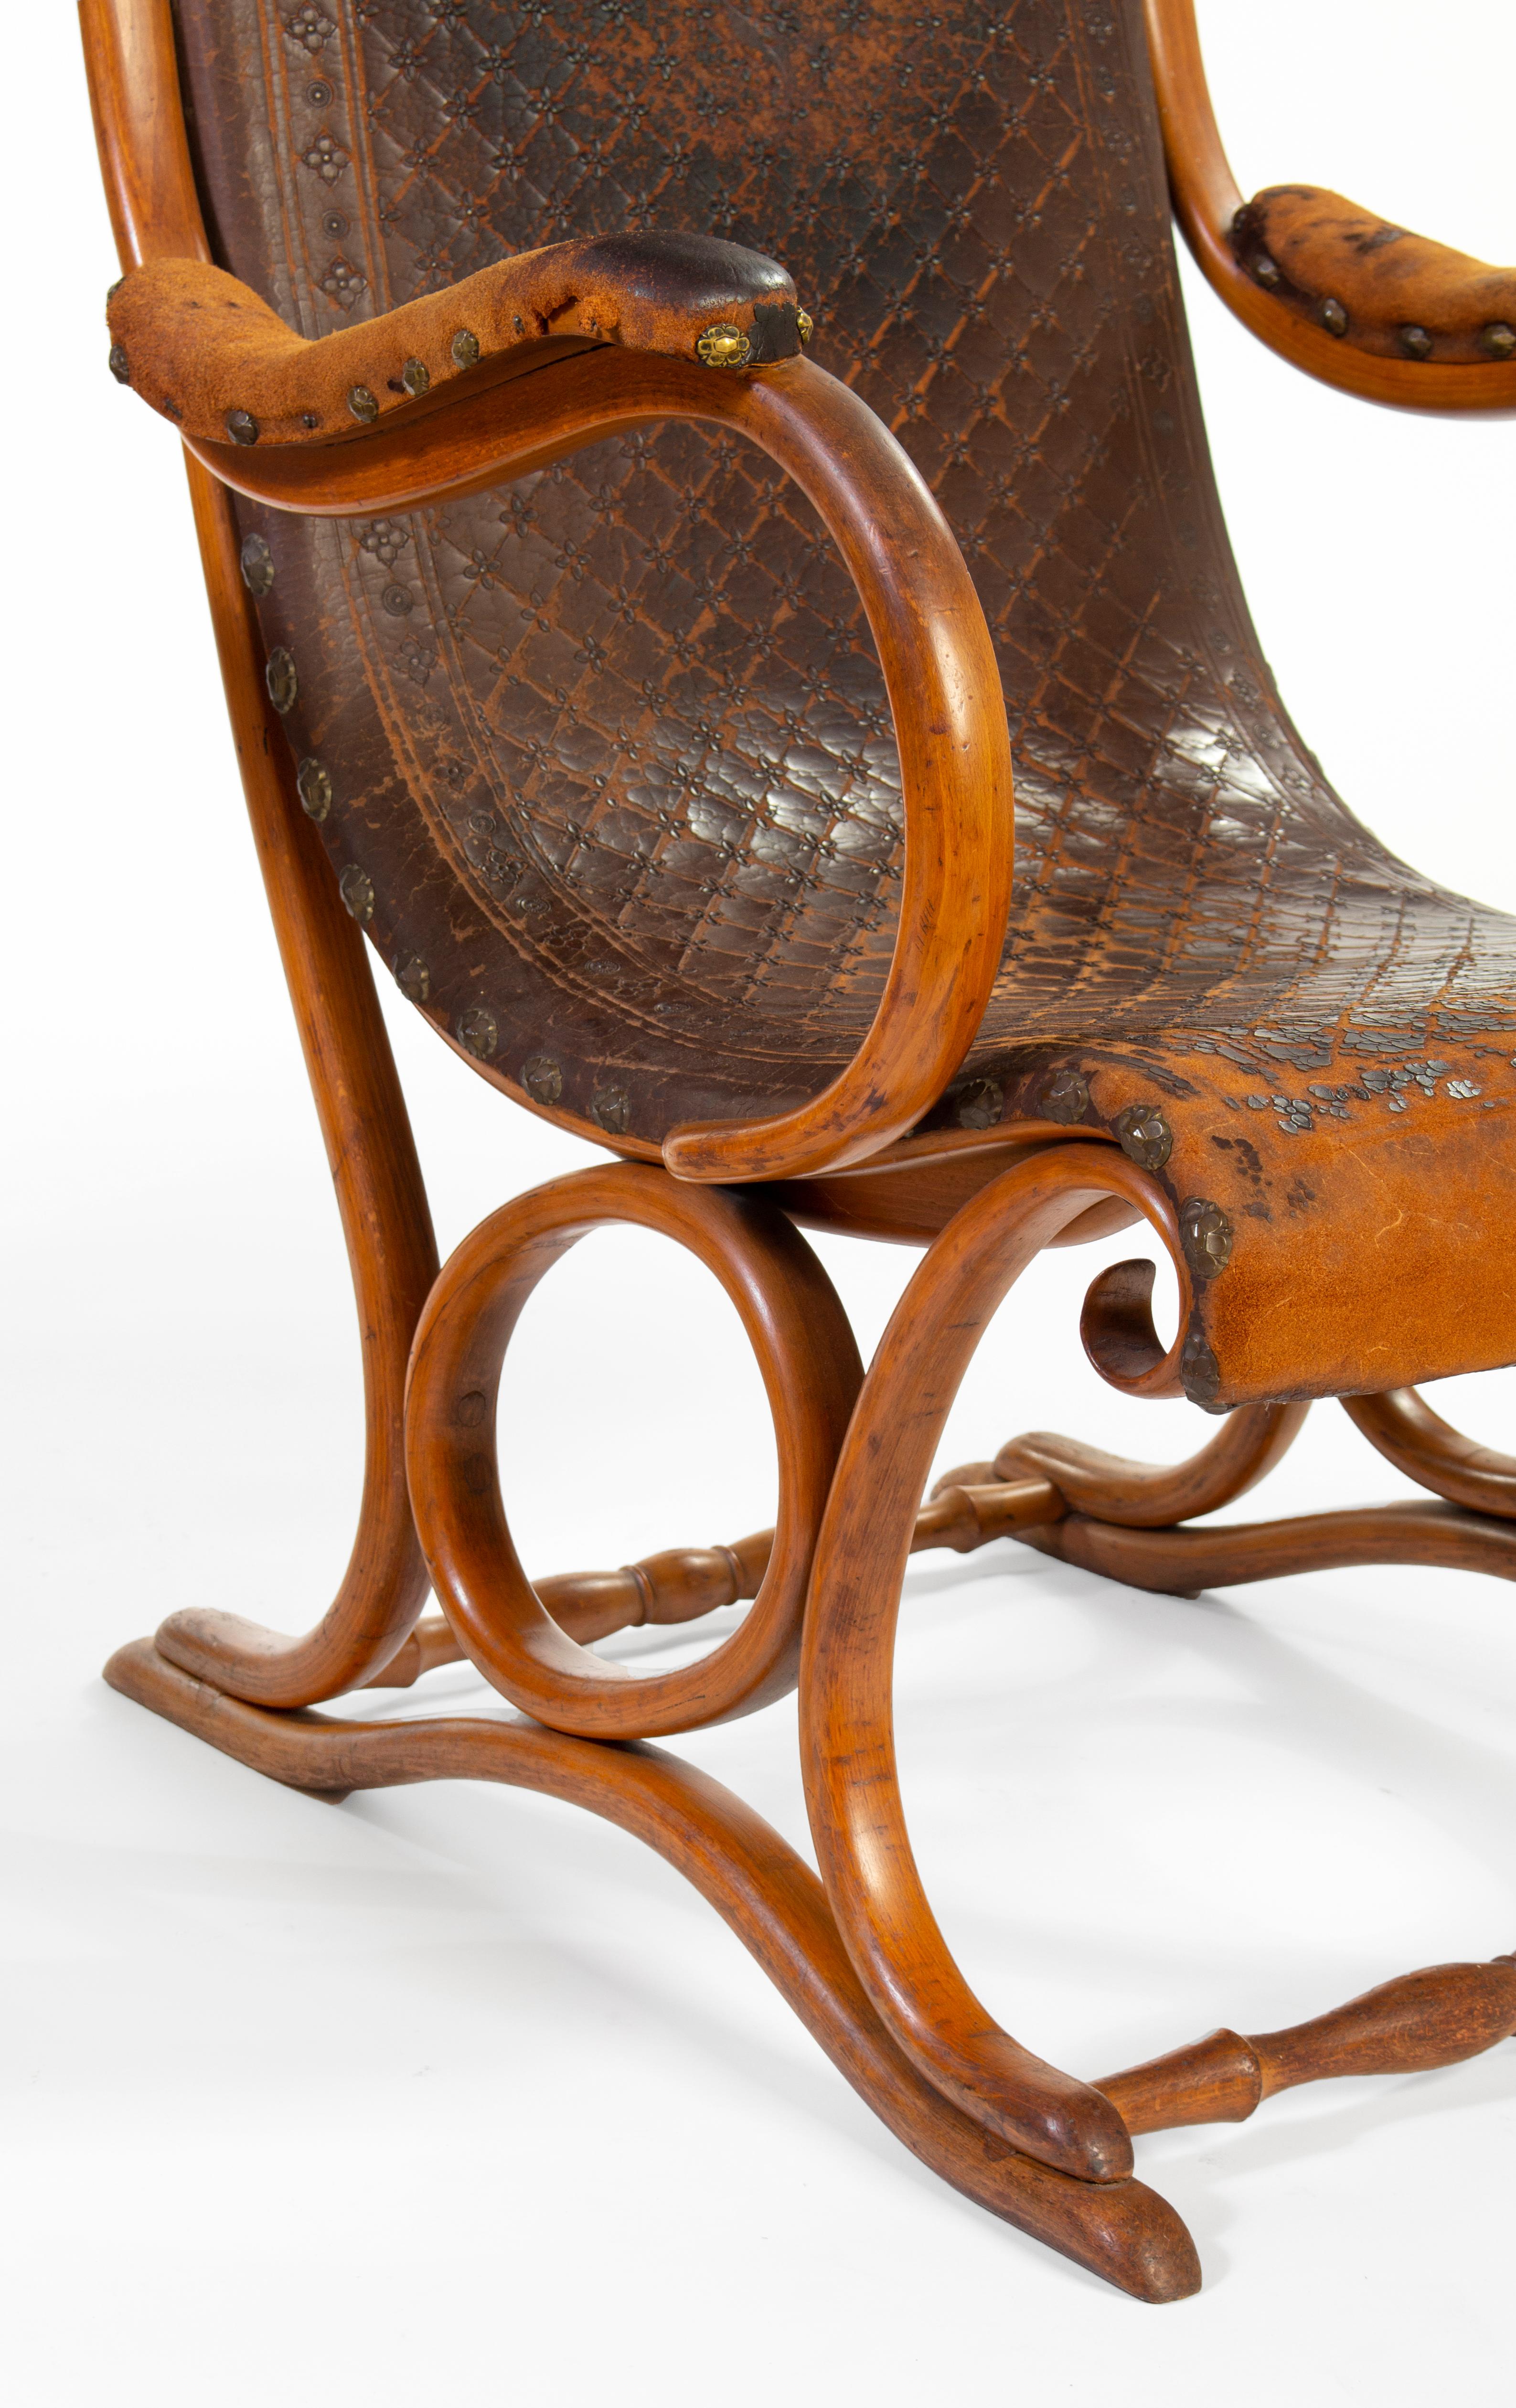 Art Nouveau Bentwood Armchairs in Pair, Model No. 1, Designed by Gebrüder Thonet c. 1900 For Sale